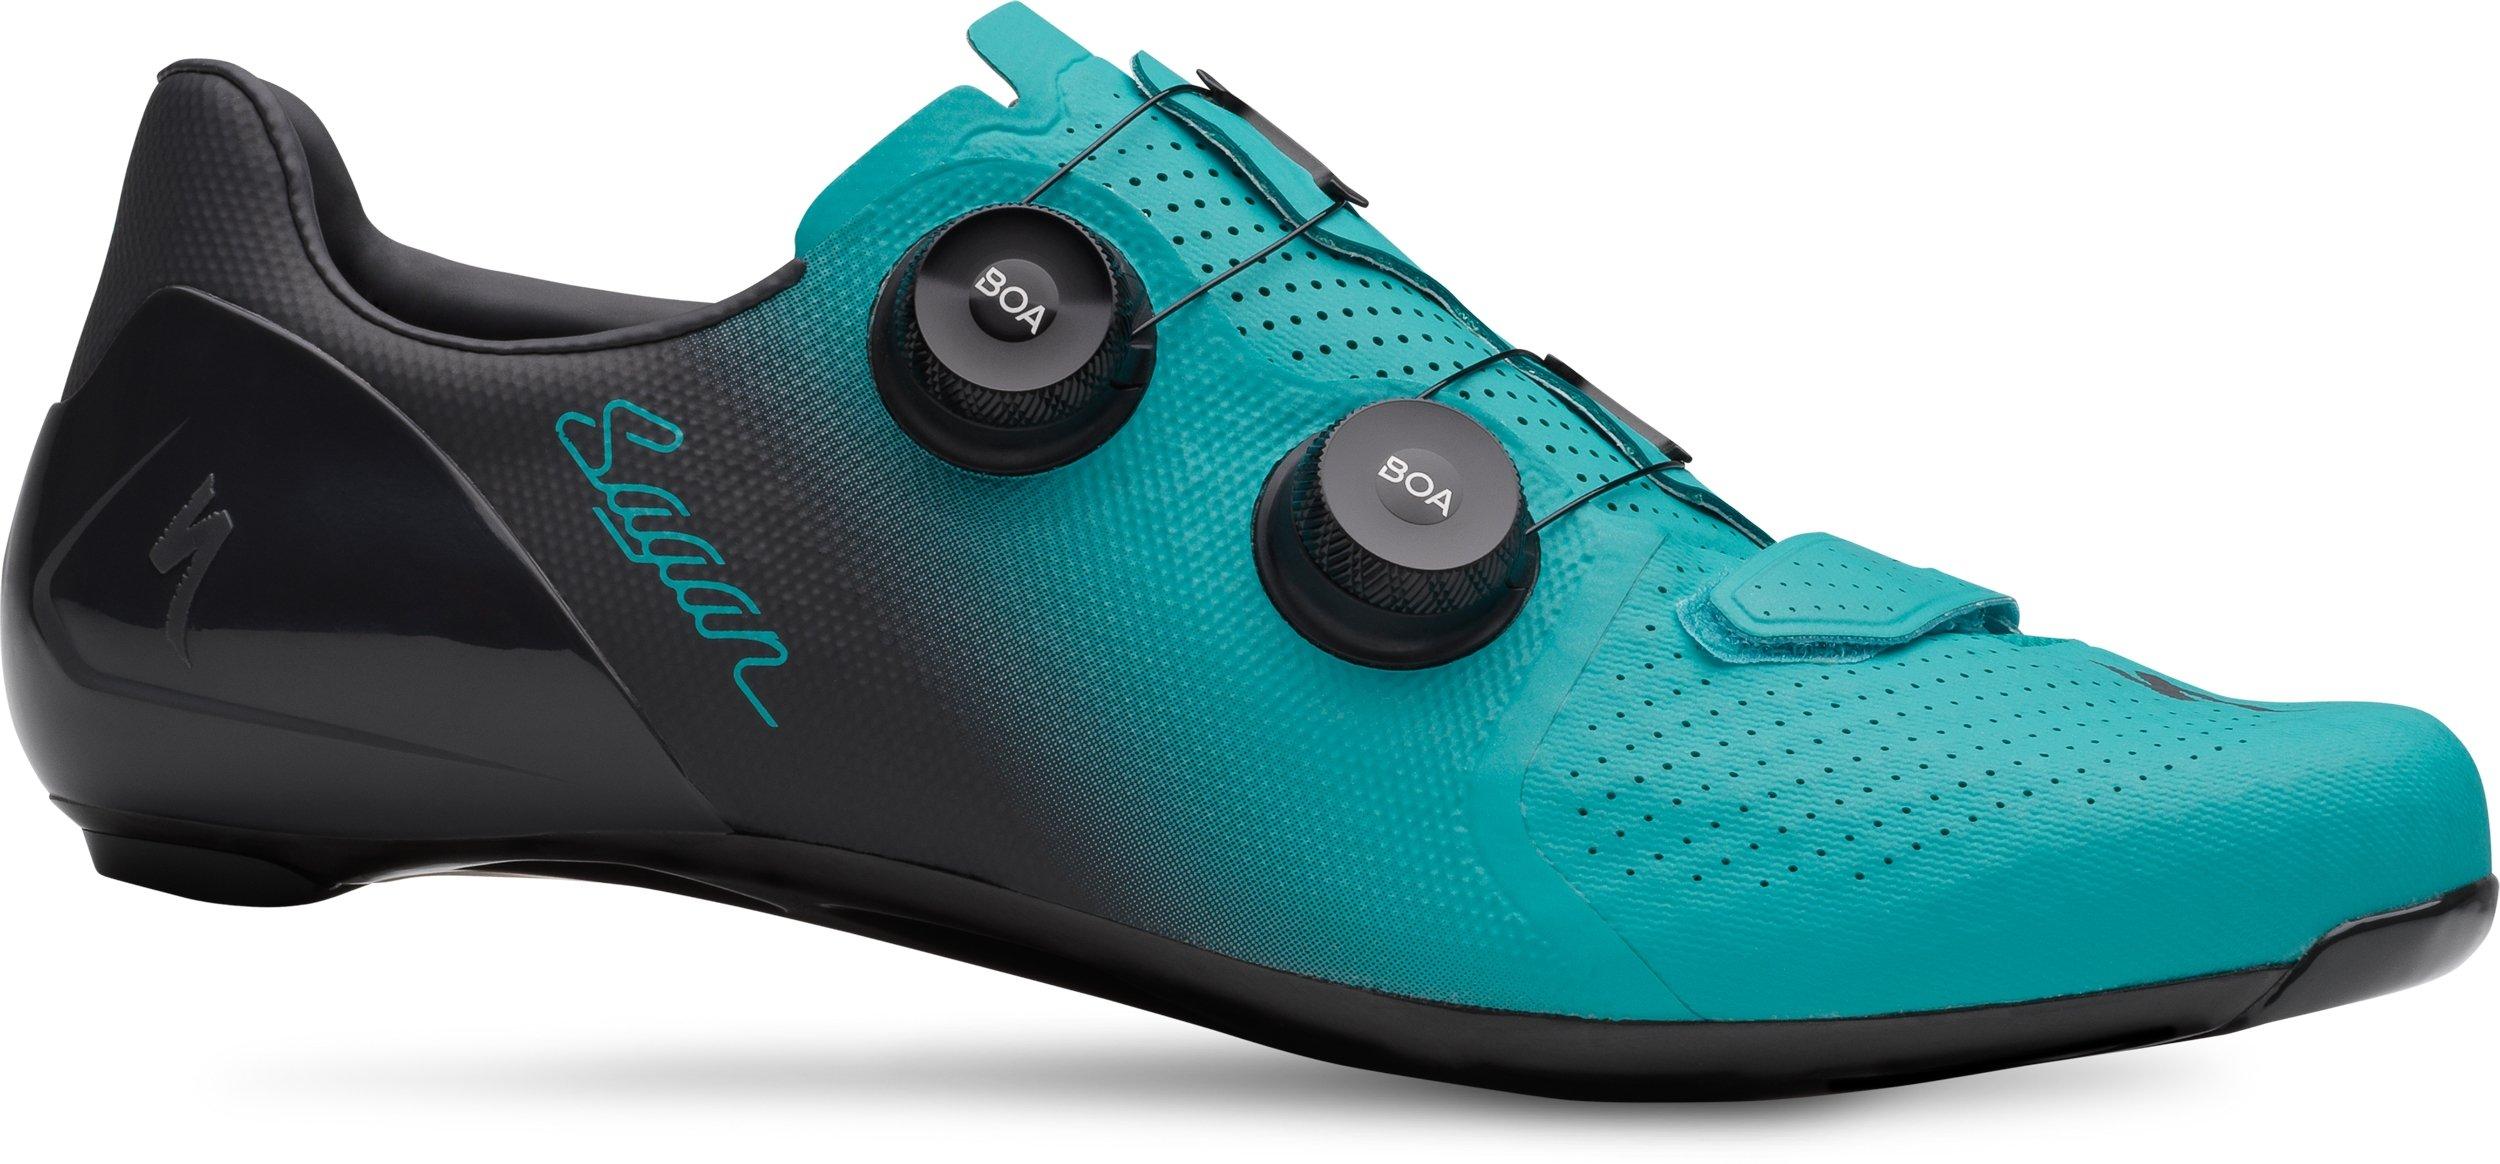 S-Works 7 Road Shoes – Sagan Collection LTD | Specialized.com